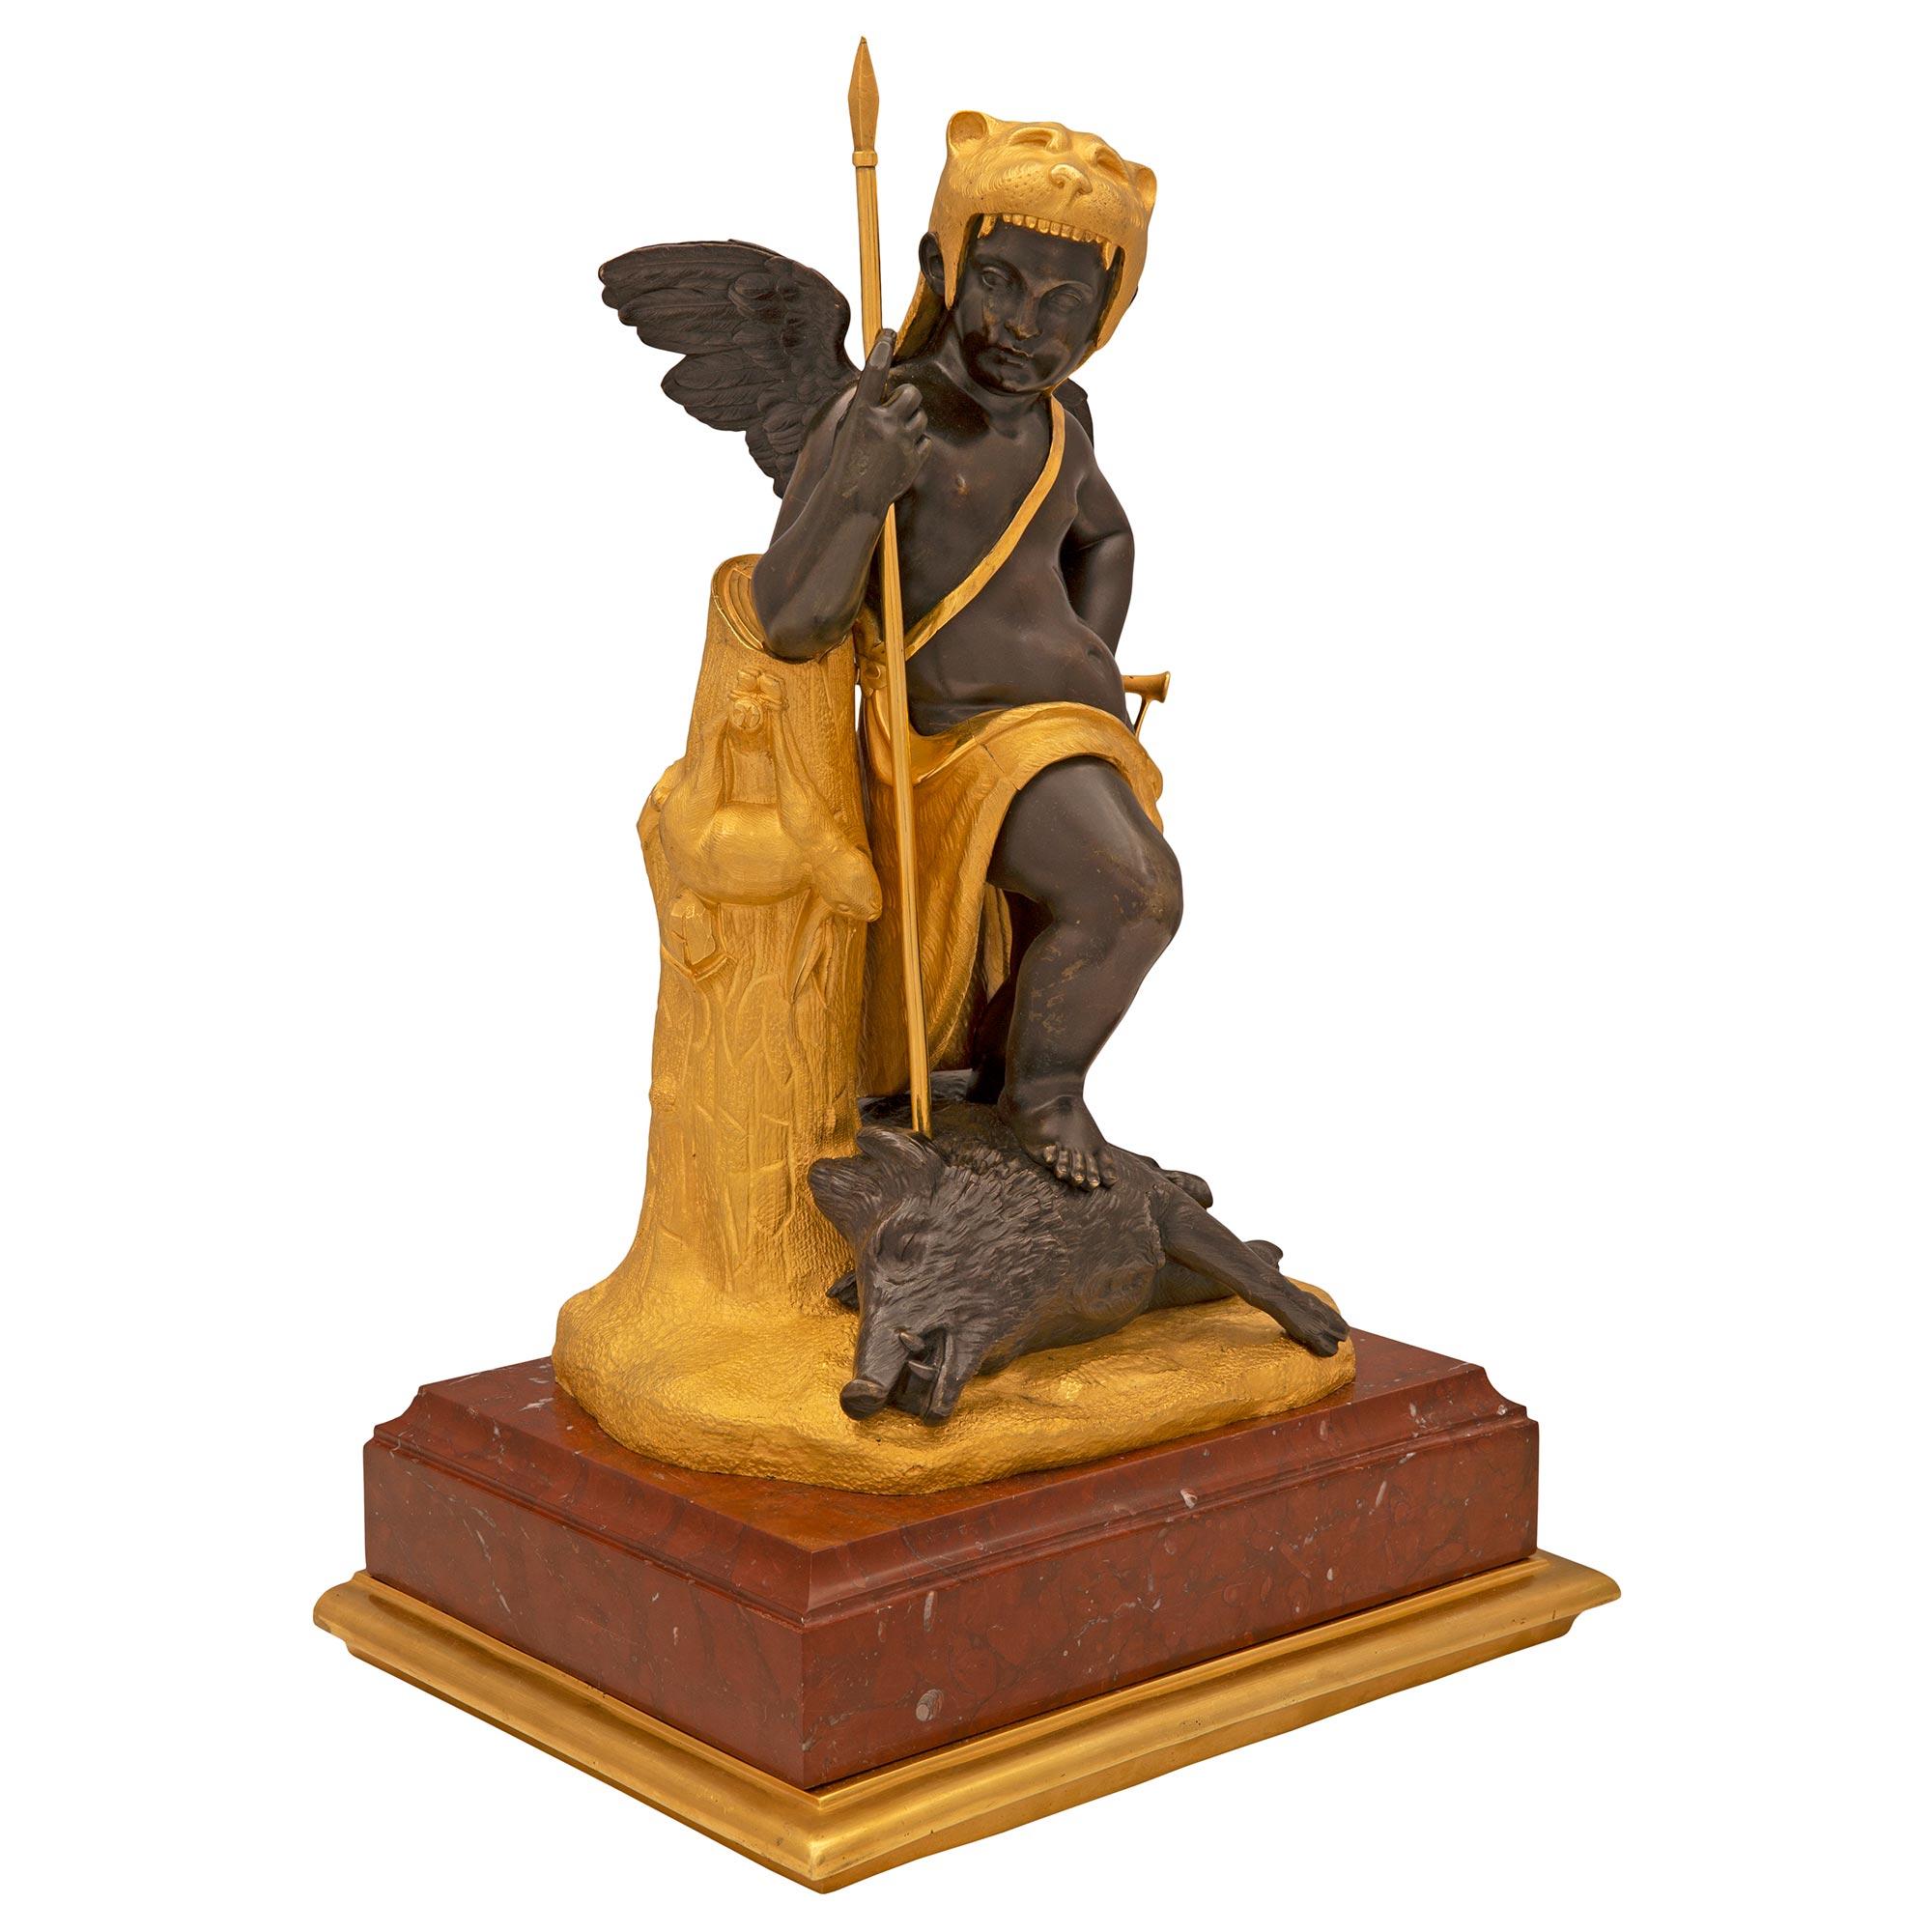 A striking French 19th century Louis XVI st. patinated bronze, ormolu, and Rouge Griotte marble statue. The statue is raised by a square Rouge Griotte marble base with a most elegant mottled ormolu band. At the center is a charming young winged